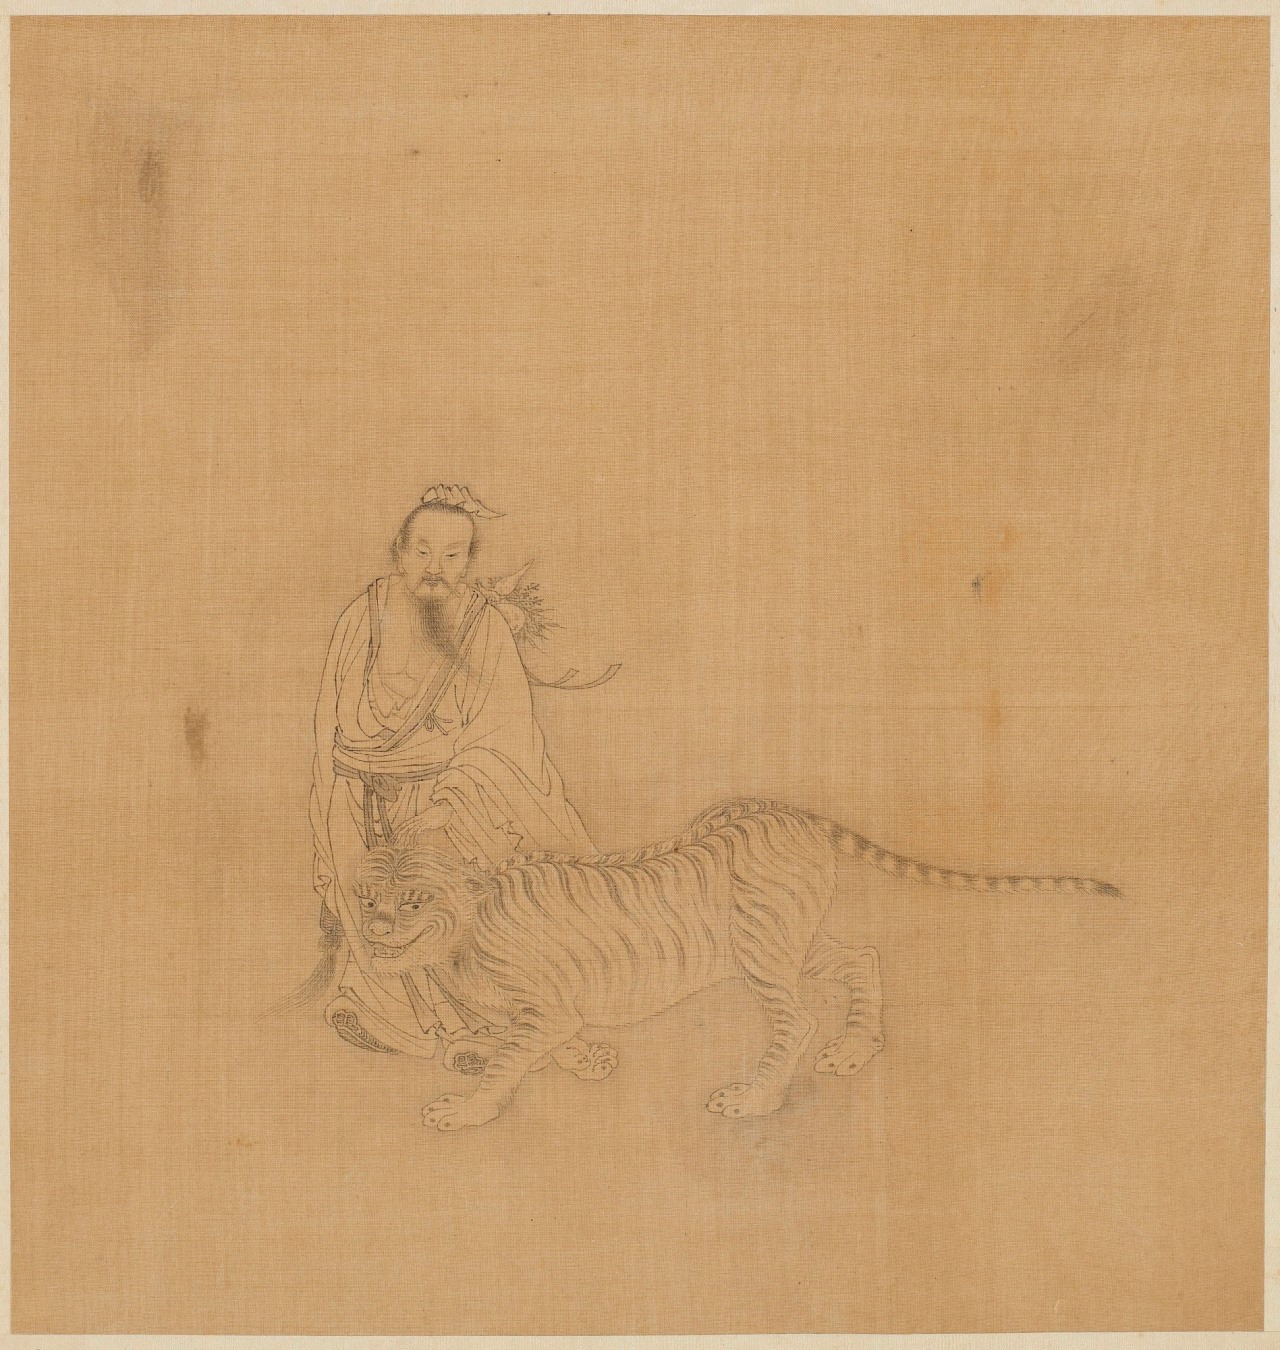 A Divinity and a tiger, Formerly attributed to Qian Xuan 錢選 (late 13th century), Qing dynasty, 1644-1911, China, Freer Gallery of Art